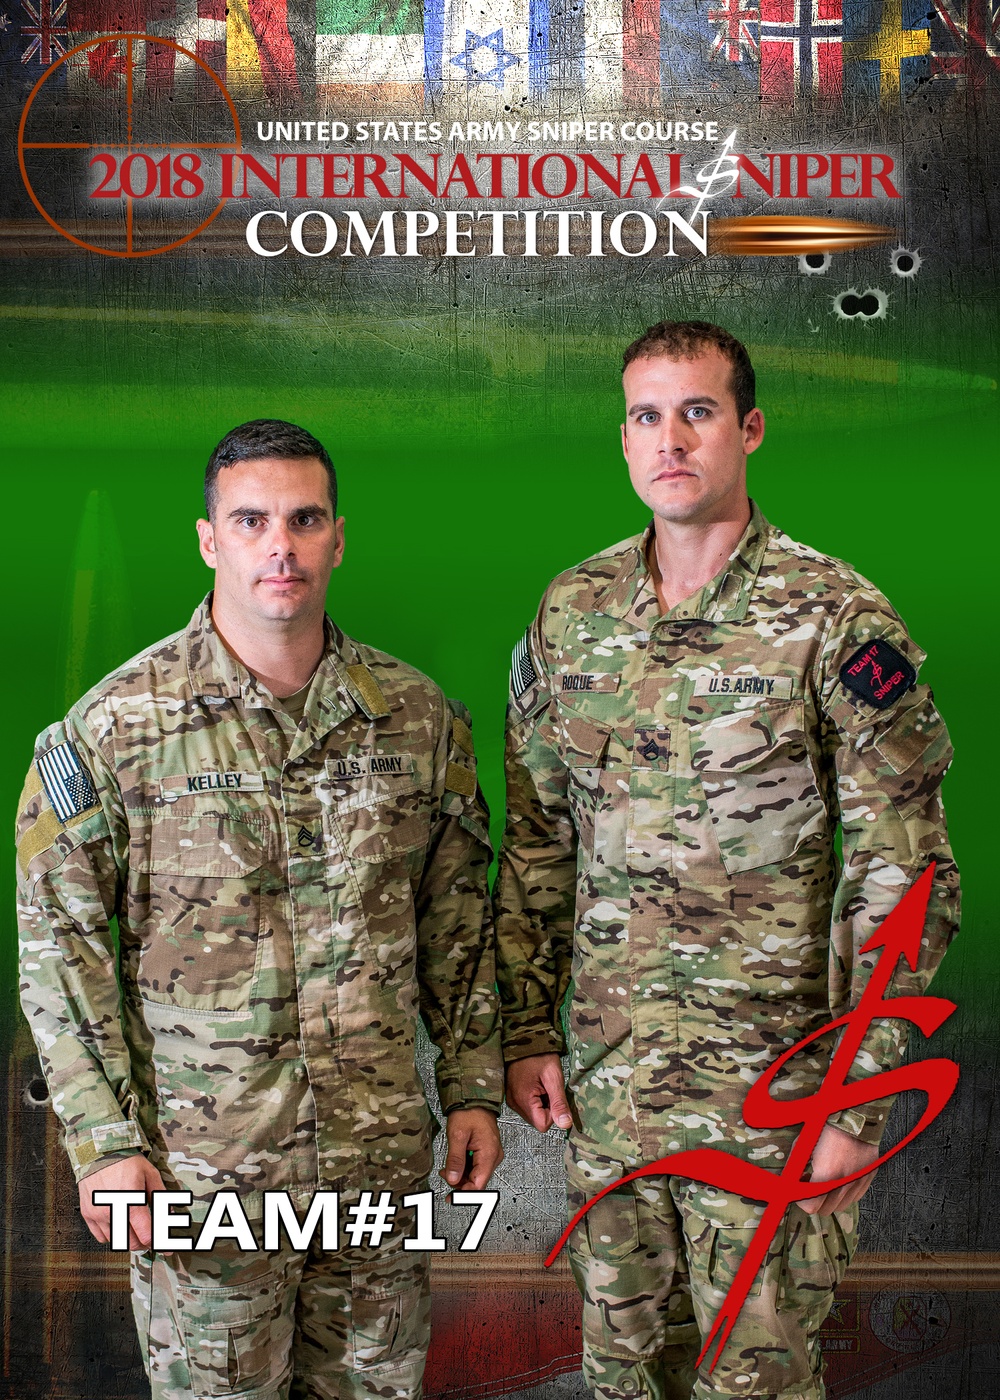 First in 2018 International Sniper Competition